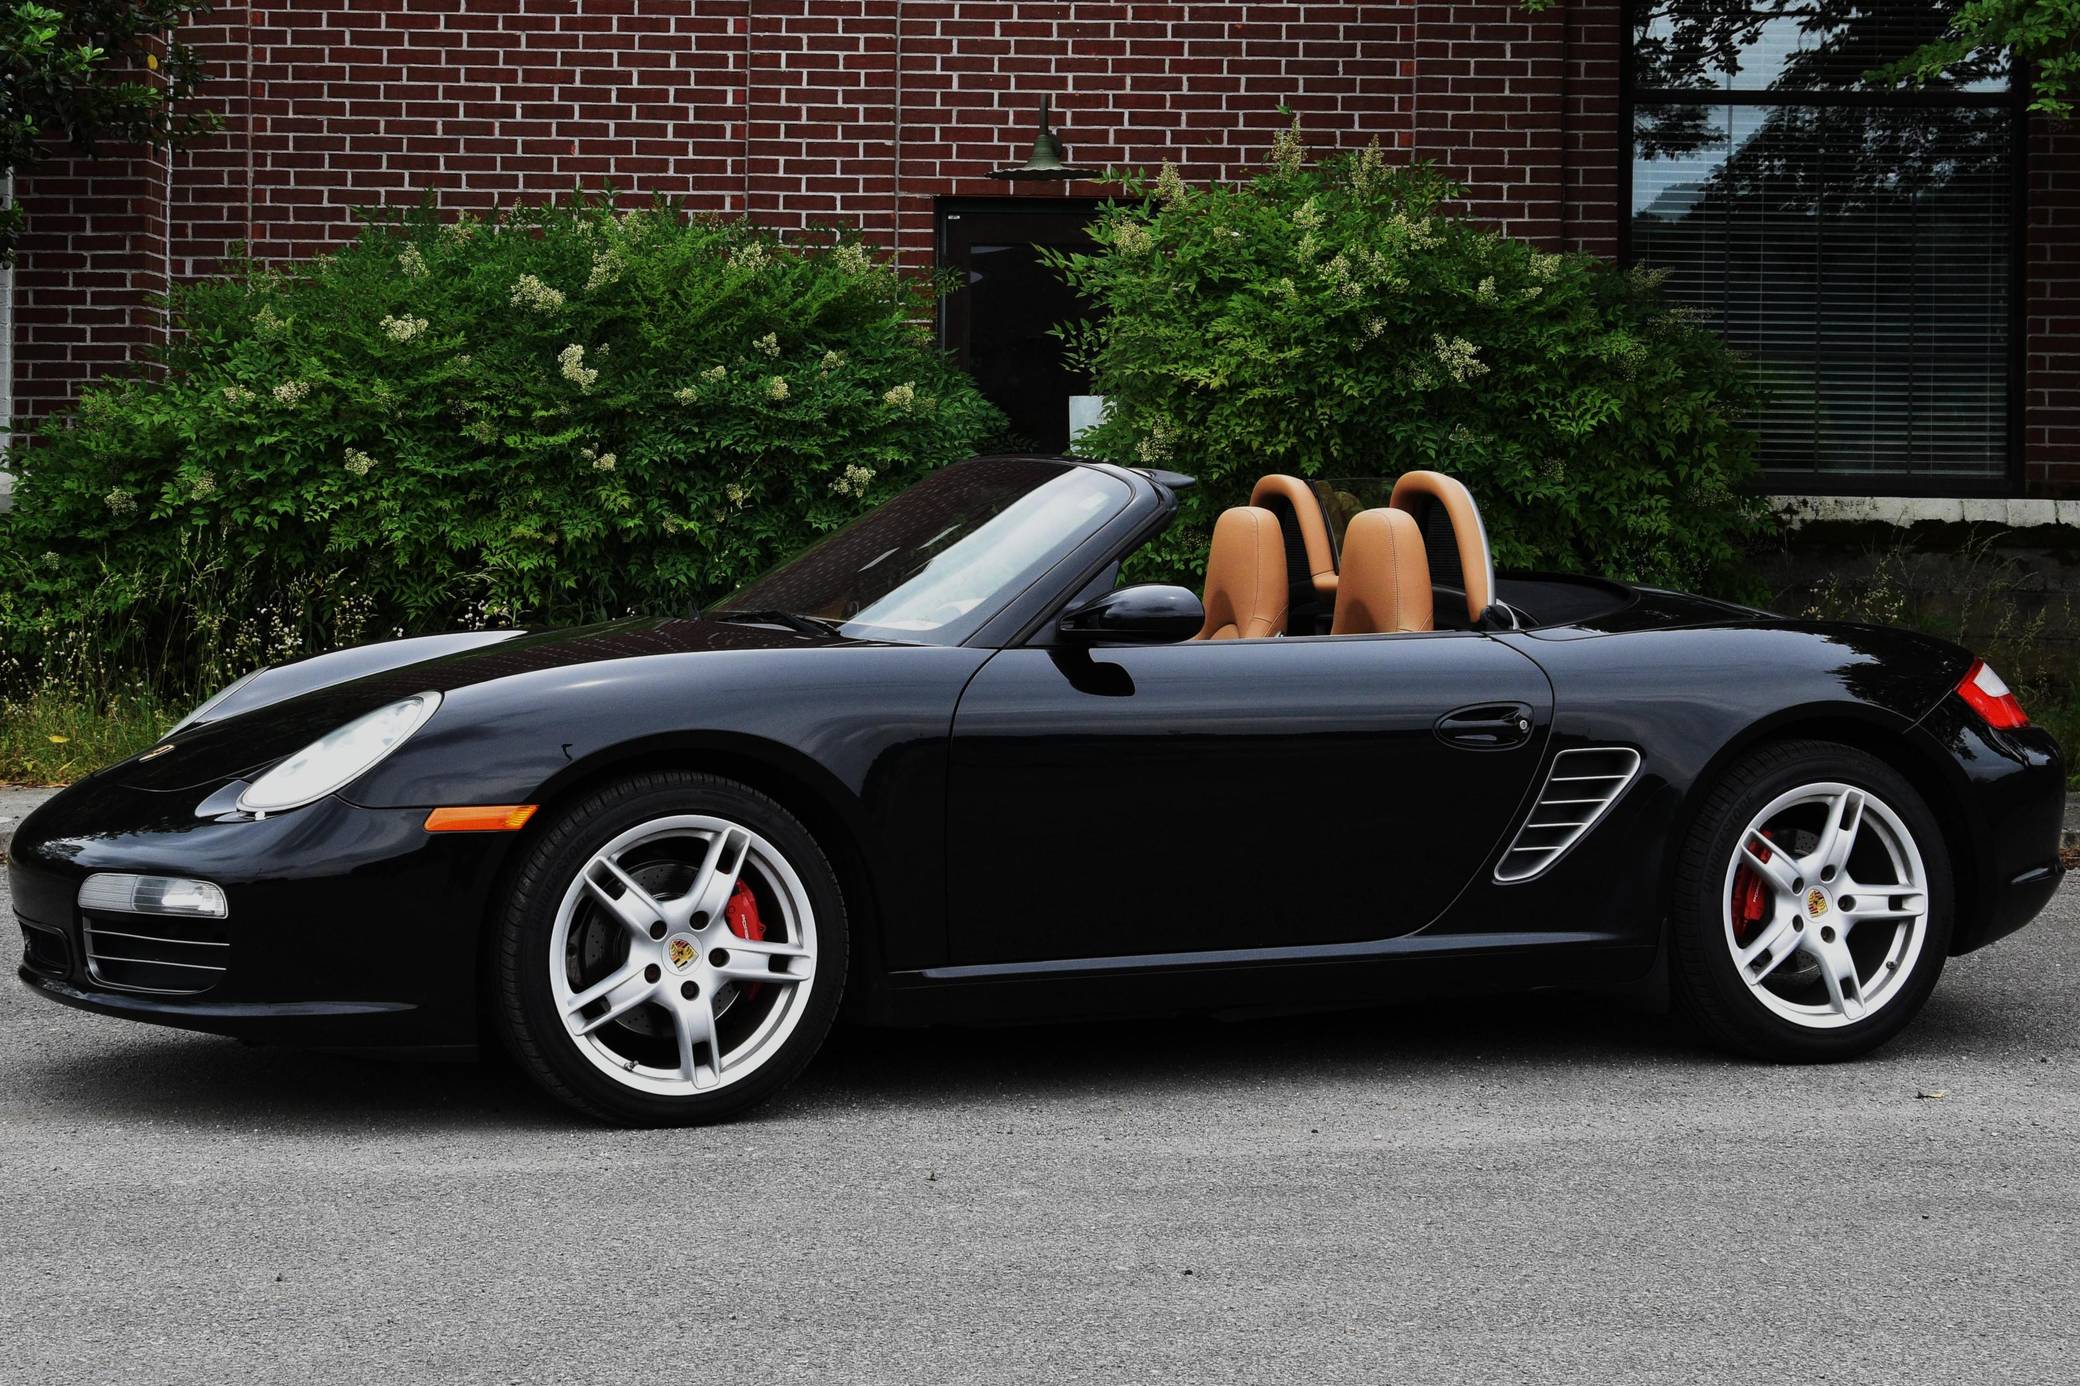 Porsche Boxster S (2008) – Specifications & Performance